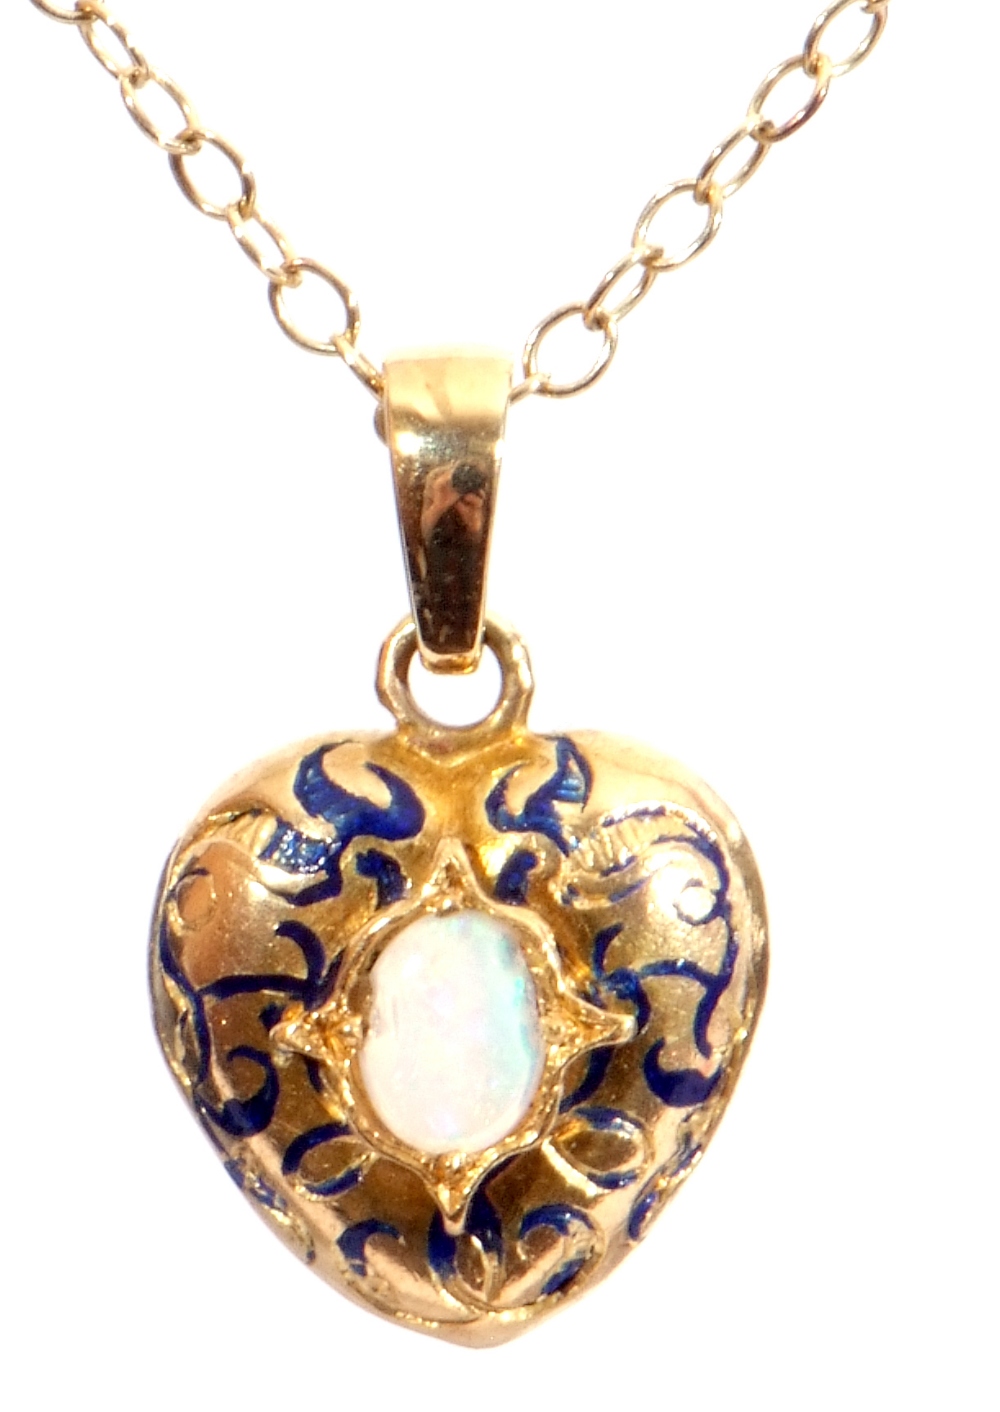 Yellow metal, opal and blue enamel pendant, heart shaped centring an oval opal in an engraved - Image 8 of 8